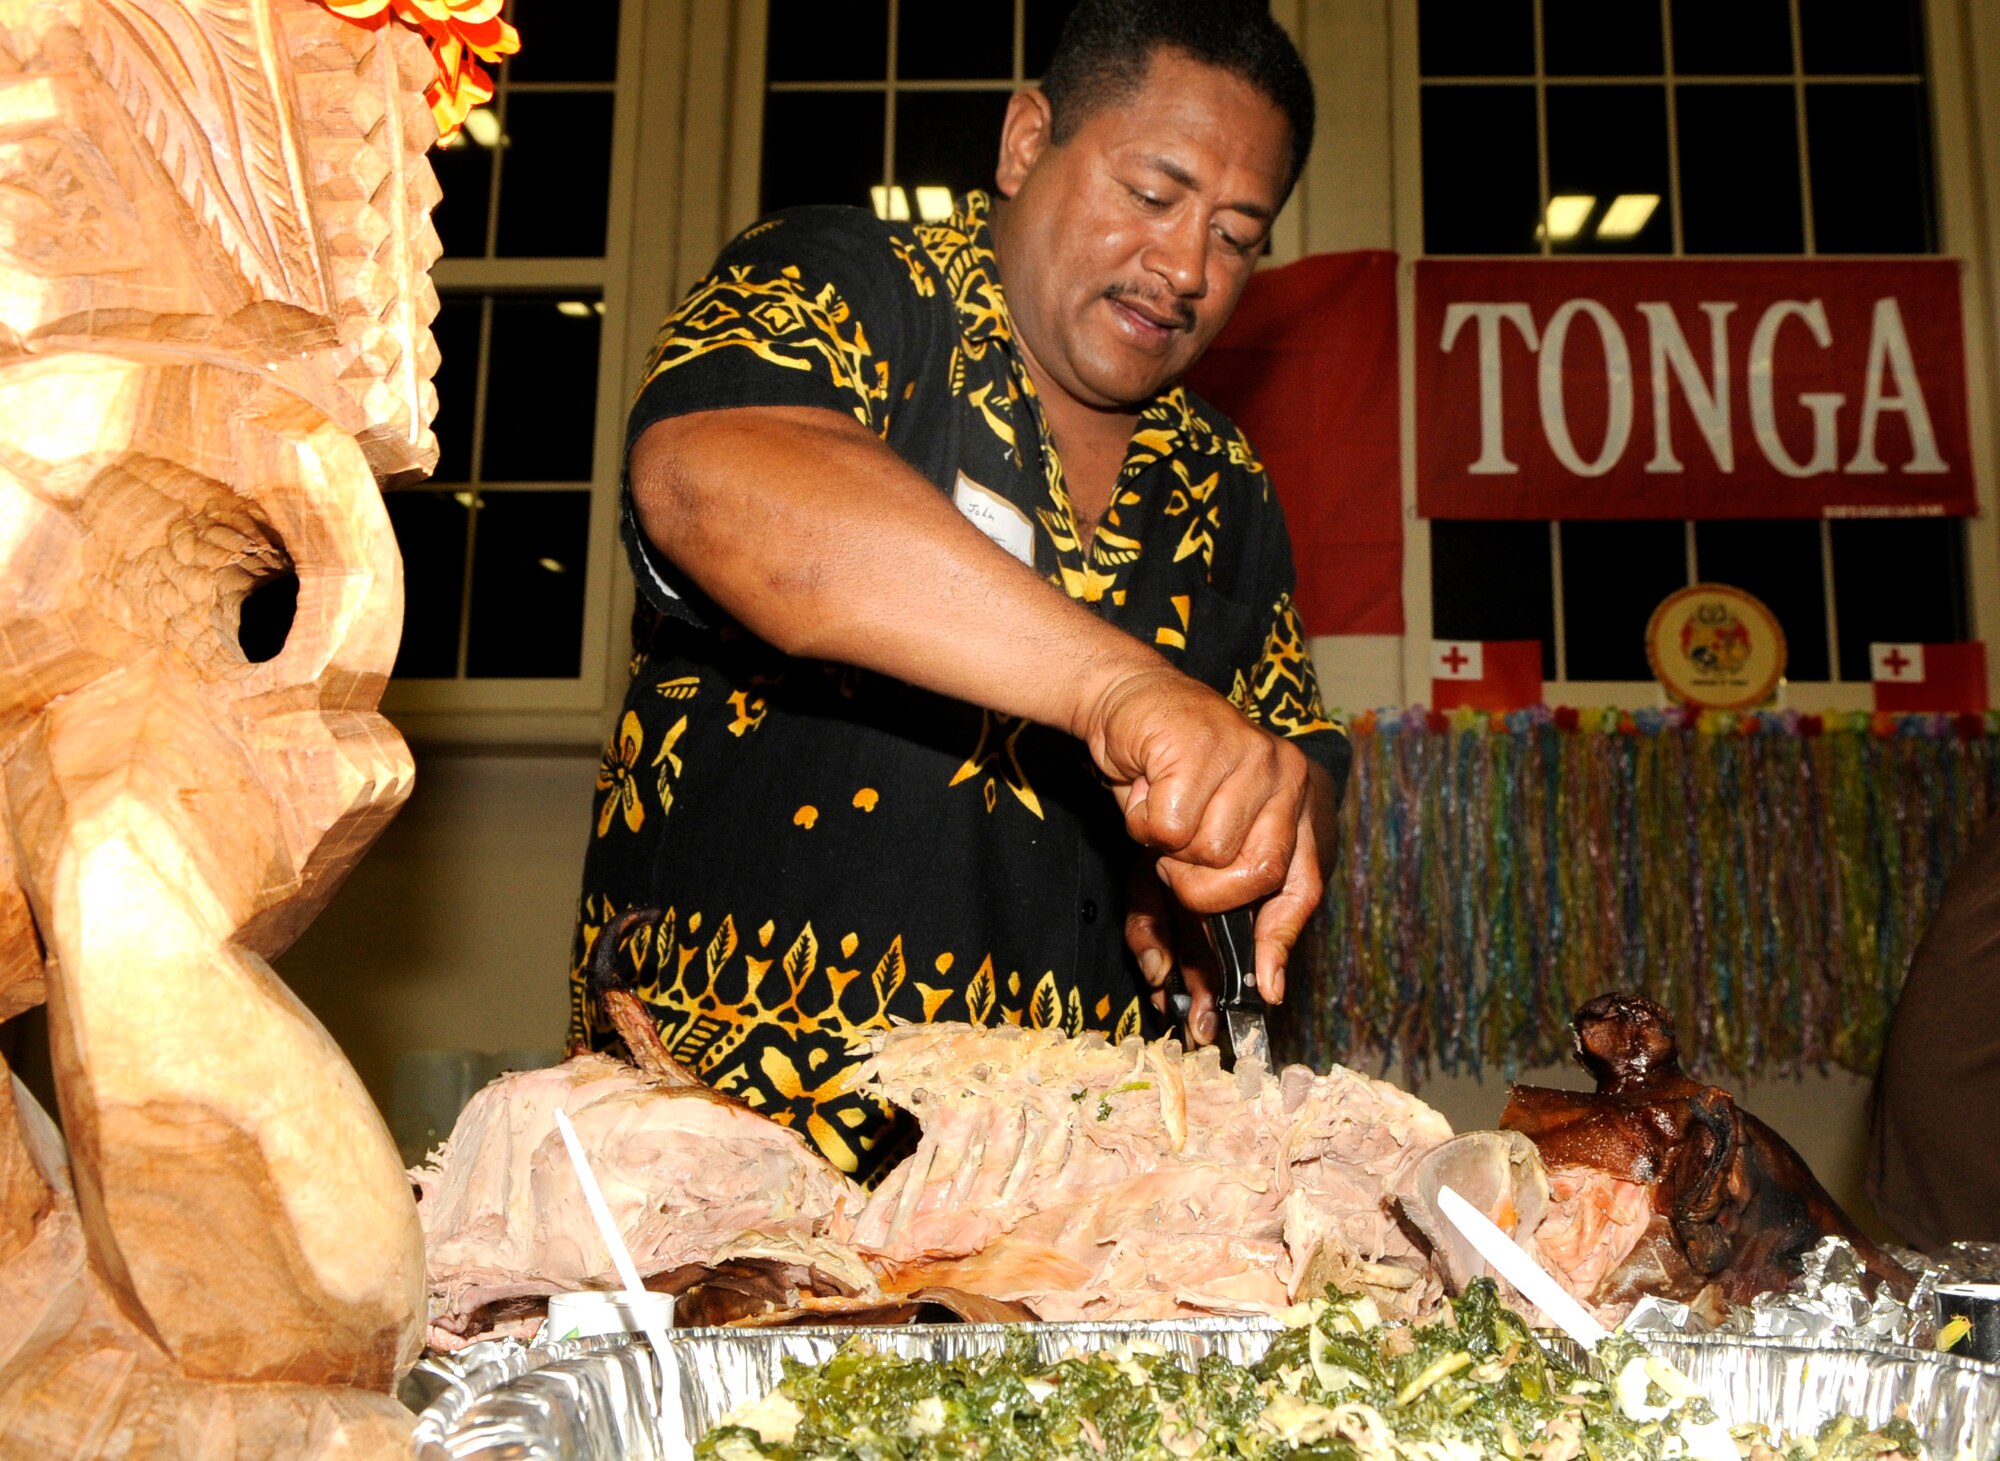 John Maafu from Kingdom of Tonga slices a whole roasted pig to serve during Coalition International Night held here in Hangar 1, Dec. 16. This year’s event marks the 5th anniversary of the annual tradition that allows military members and families to become more familiar with various native cuisines, customs and dress of the 63 different countries represented in the U.S. Central Command Coalition Village. During this event many Coalition members and their families volunteered to cook some of their countries favorite or famous cuisines to share. The event ended with the United States Central Command commander, Gen. David Petraeus, giving a thank you speech to all those who came out. The Kingdom of Tonga is in the South Pacific Ocean and consists of 71 islands, 48 of them inhabited.  The islands lie south of Samoa, about one-third of the way from New Zealand to Hawaii.